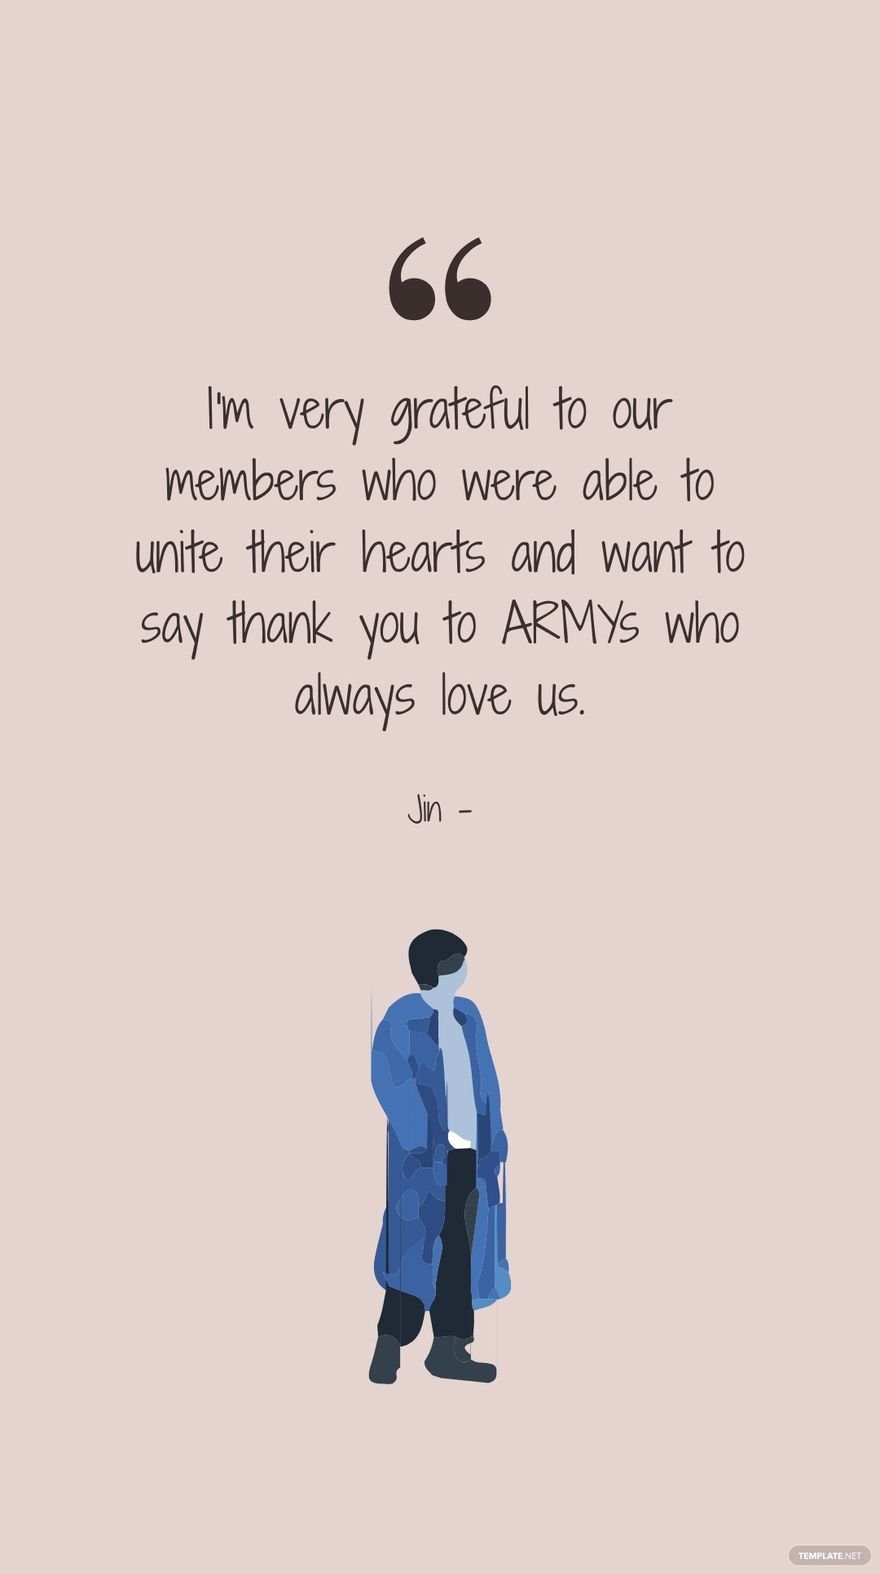 Free Jin - I'm very grateful to our members who were able to unite their hearts and want to say thank you to ARMYs who always love us. in JPG